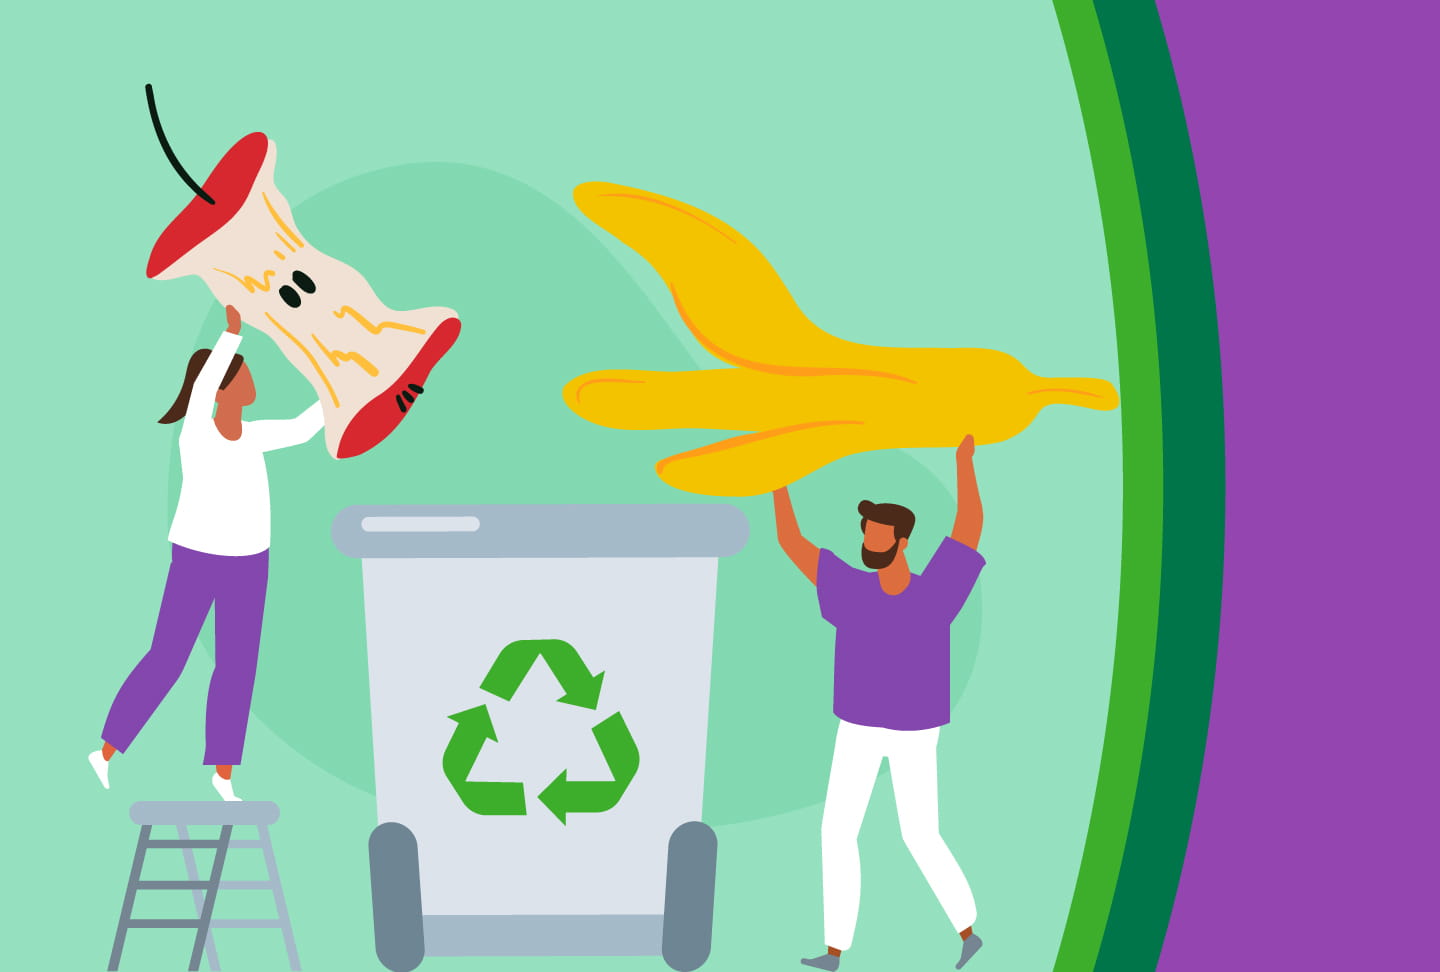 Illustration of people recycling apple core and banana peel